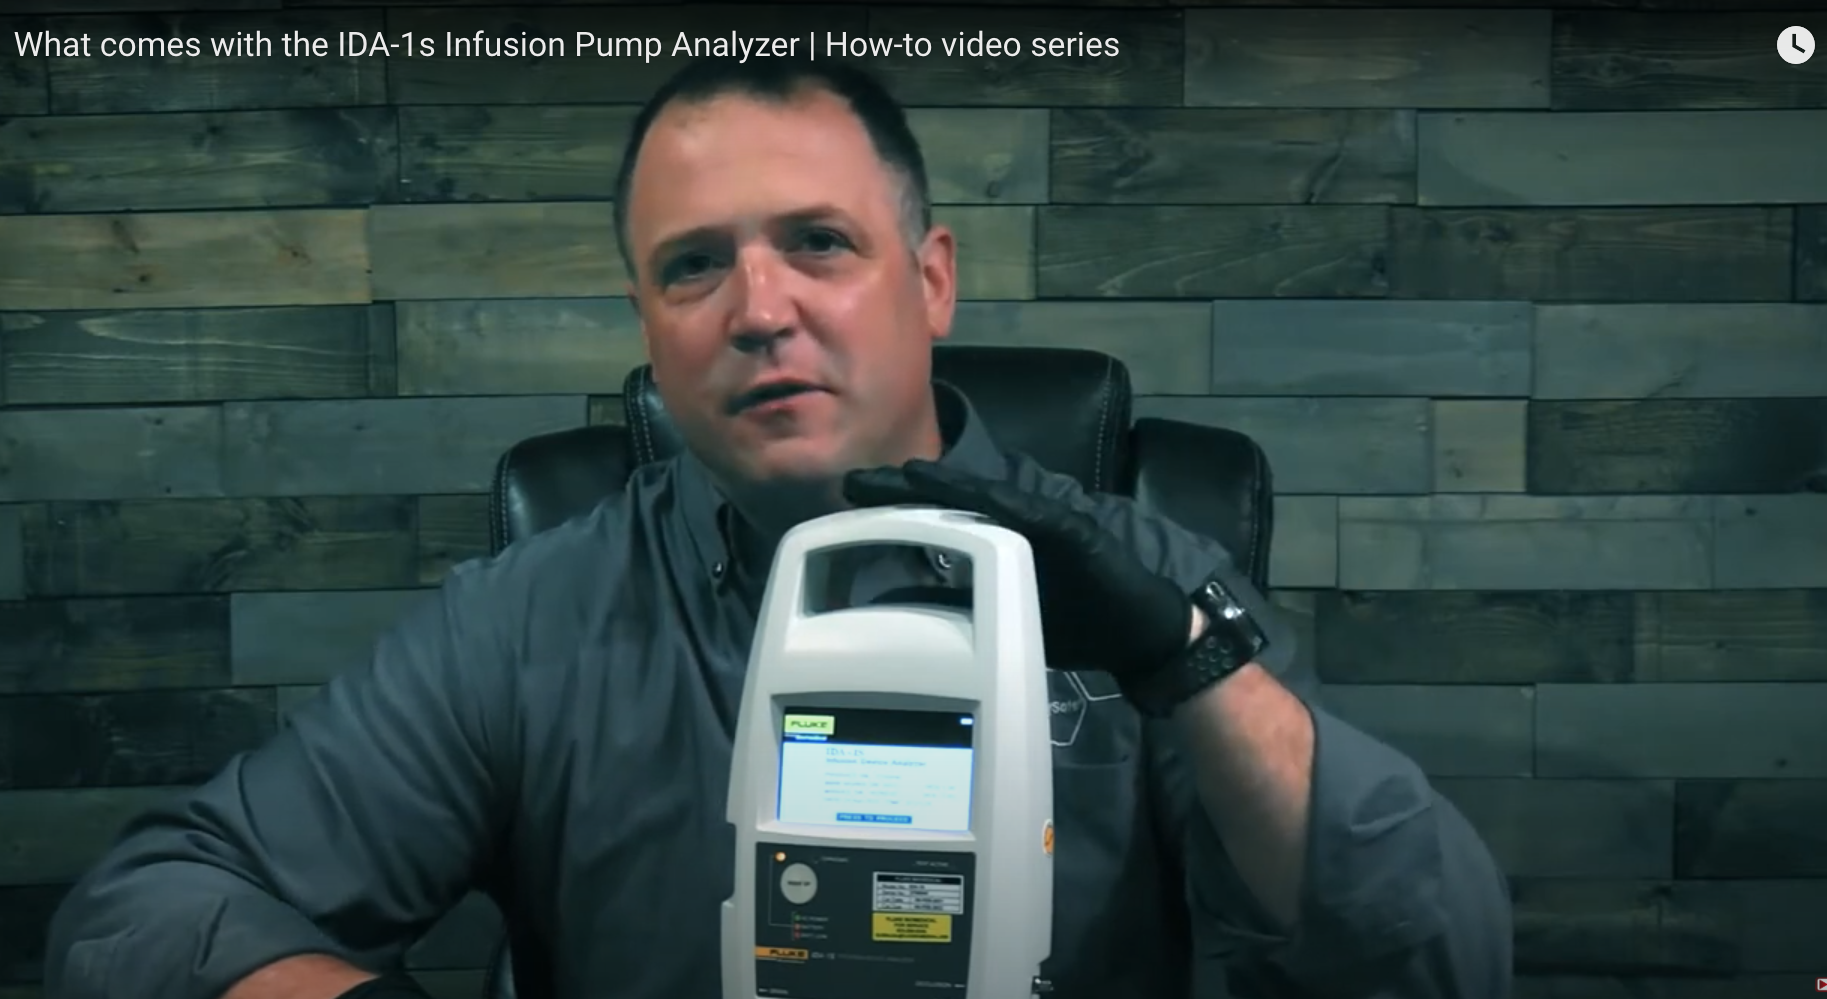 What comes with the IDA-1s Infusion Pump Analyzer